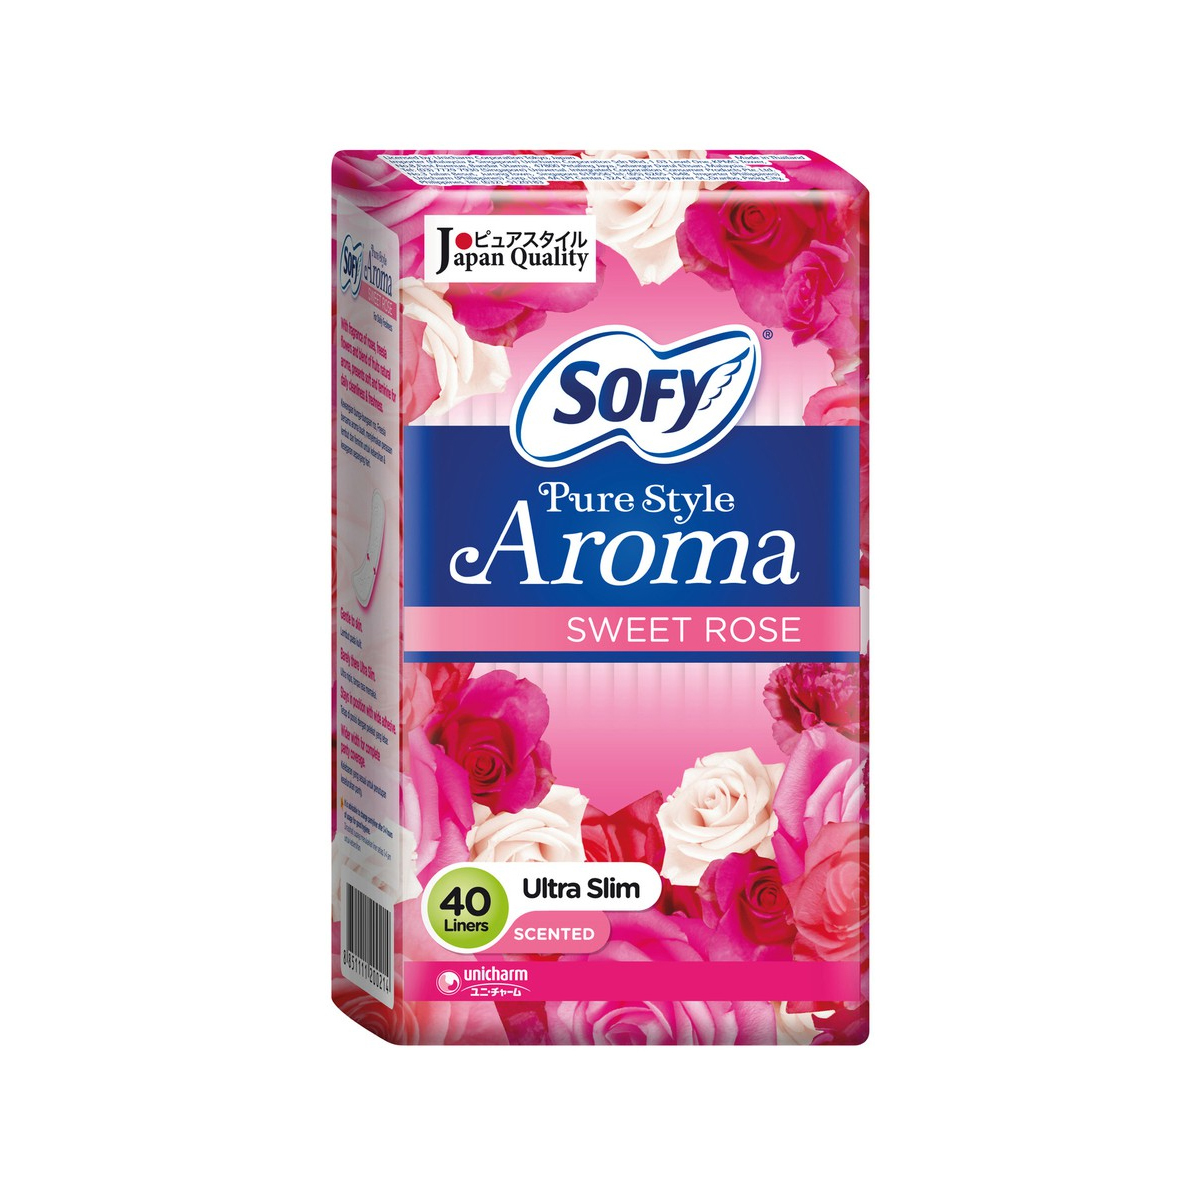 Sofy Pure Style Aroma Sweet Rose Ultra Slim Scented 40's